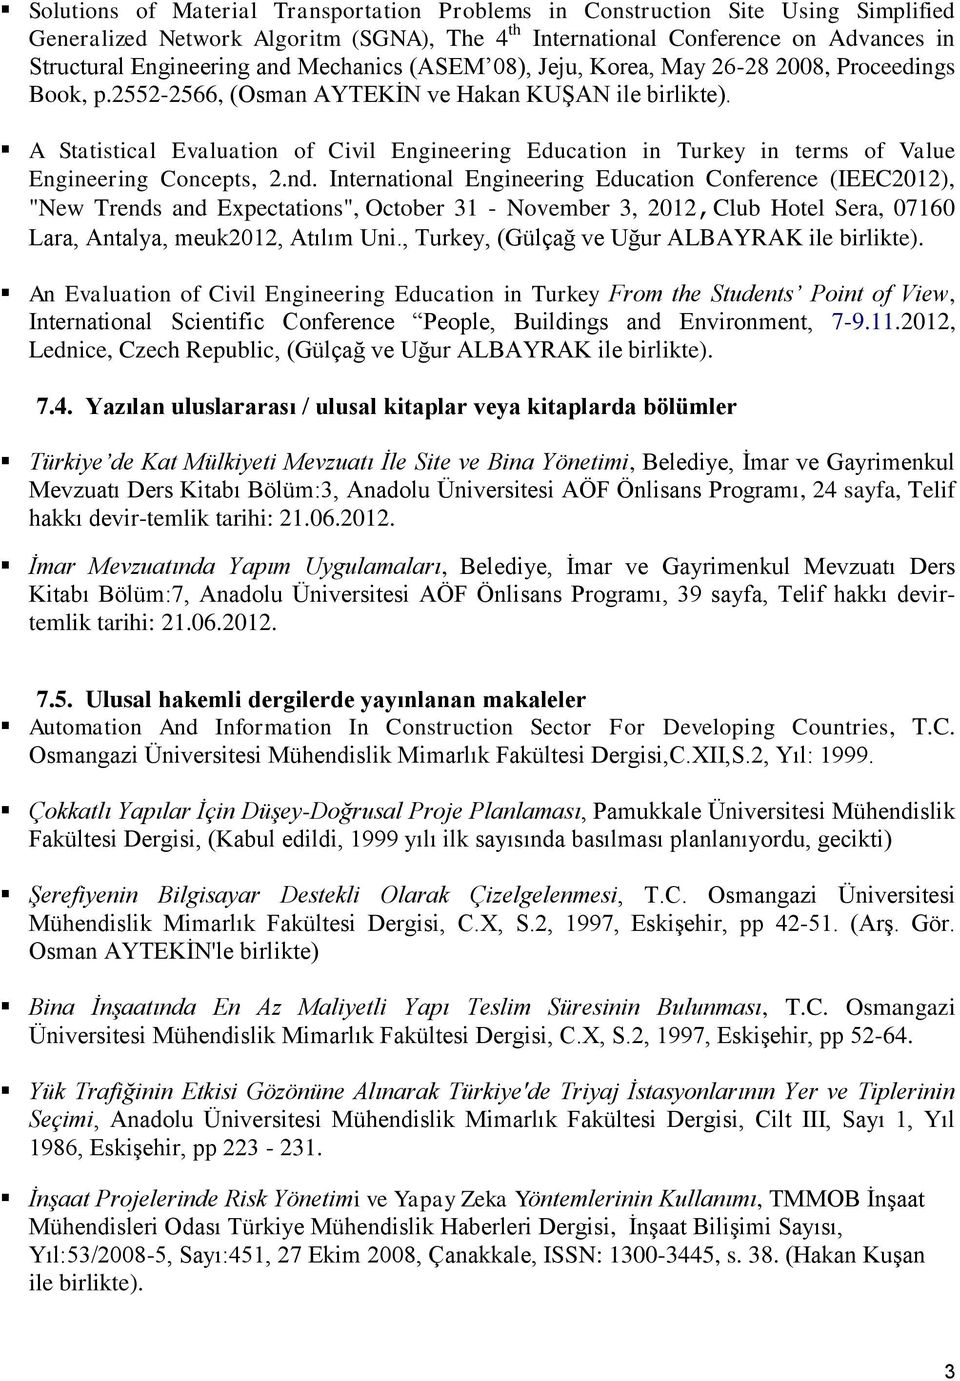 A Statistical Evaluation of Civil Engineering Education in Turkey in terms of Value Engineering Concepts, 2.nd.